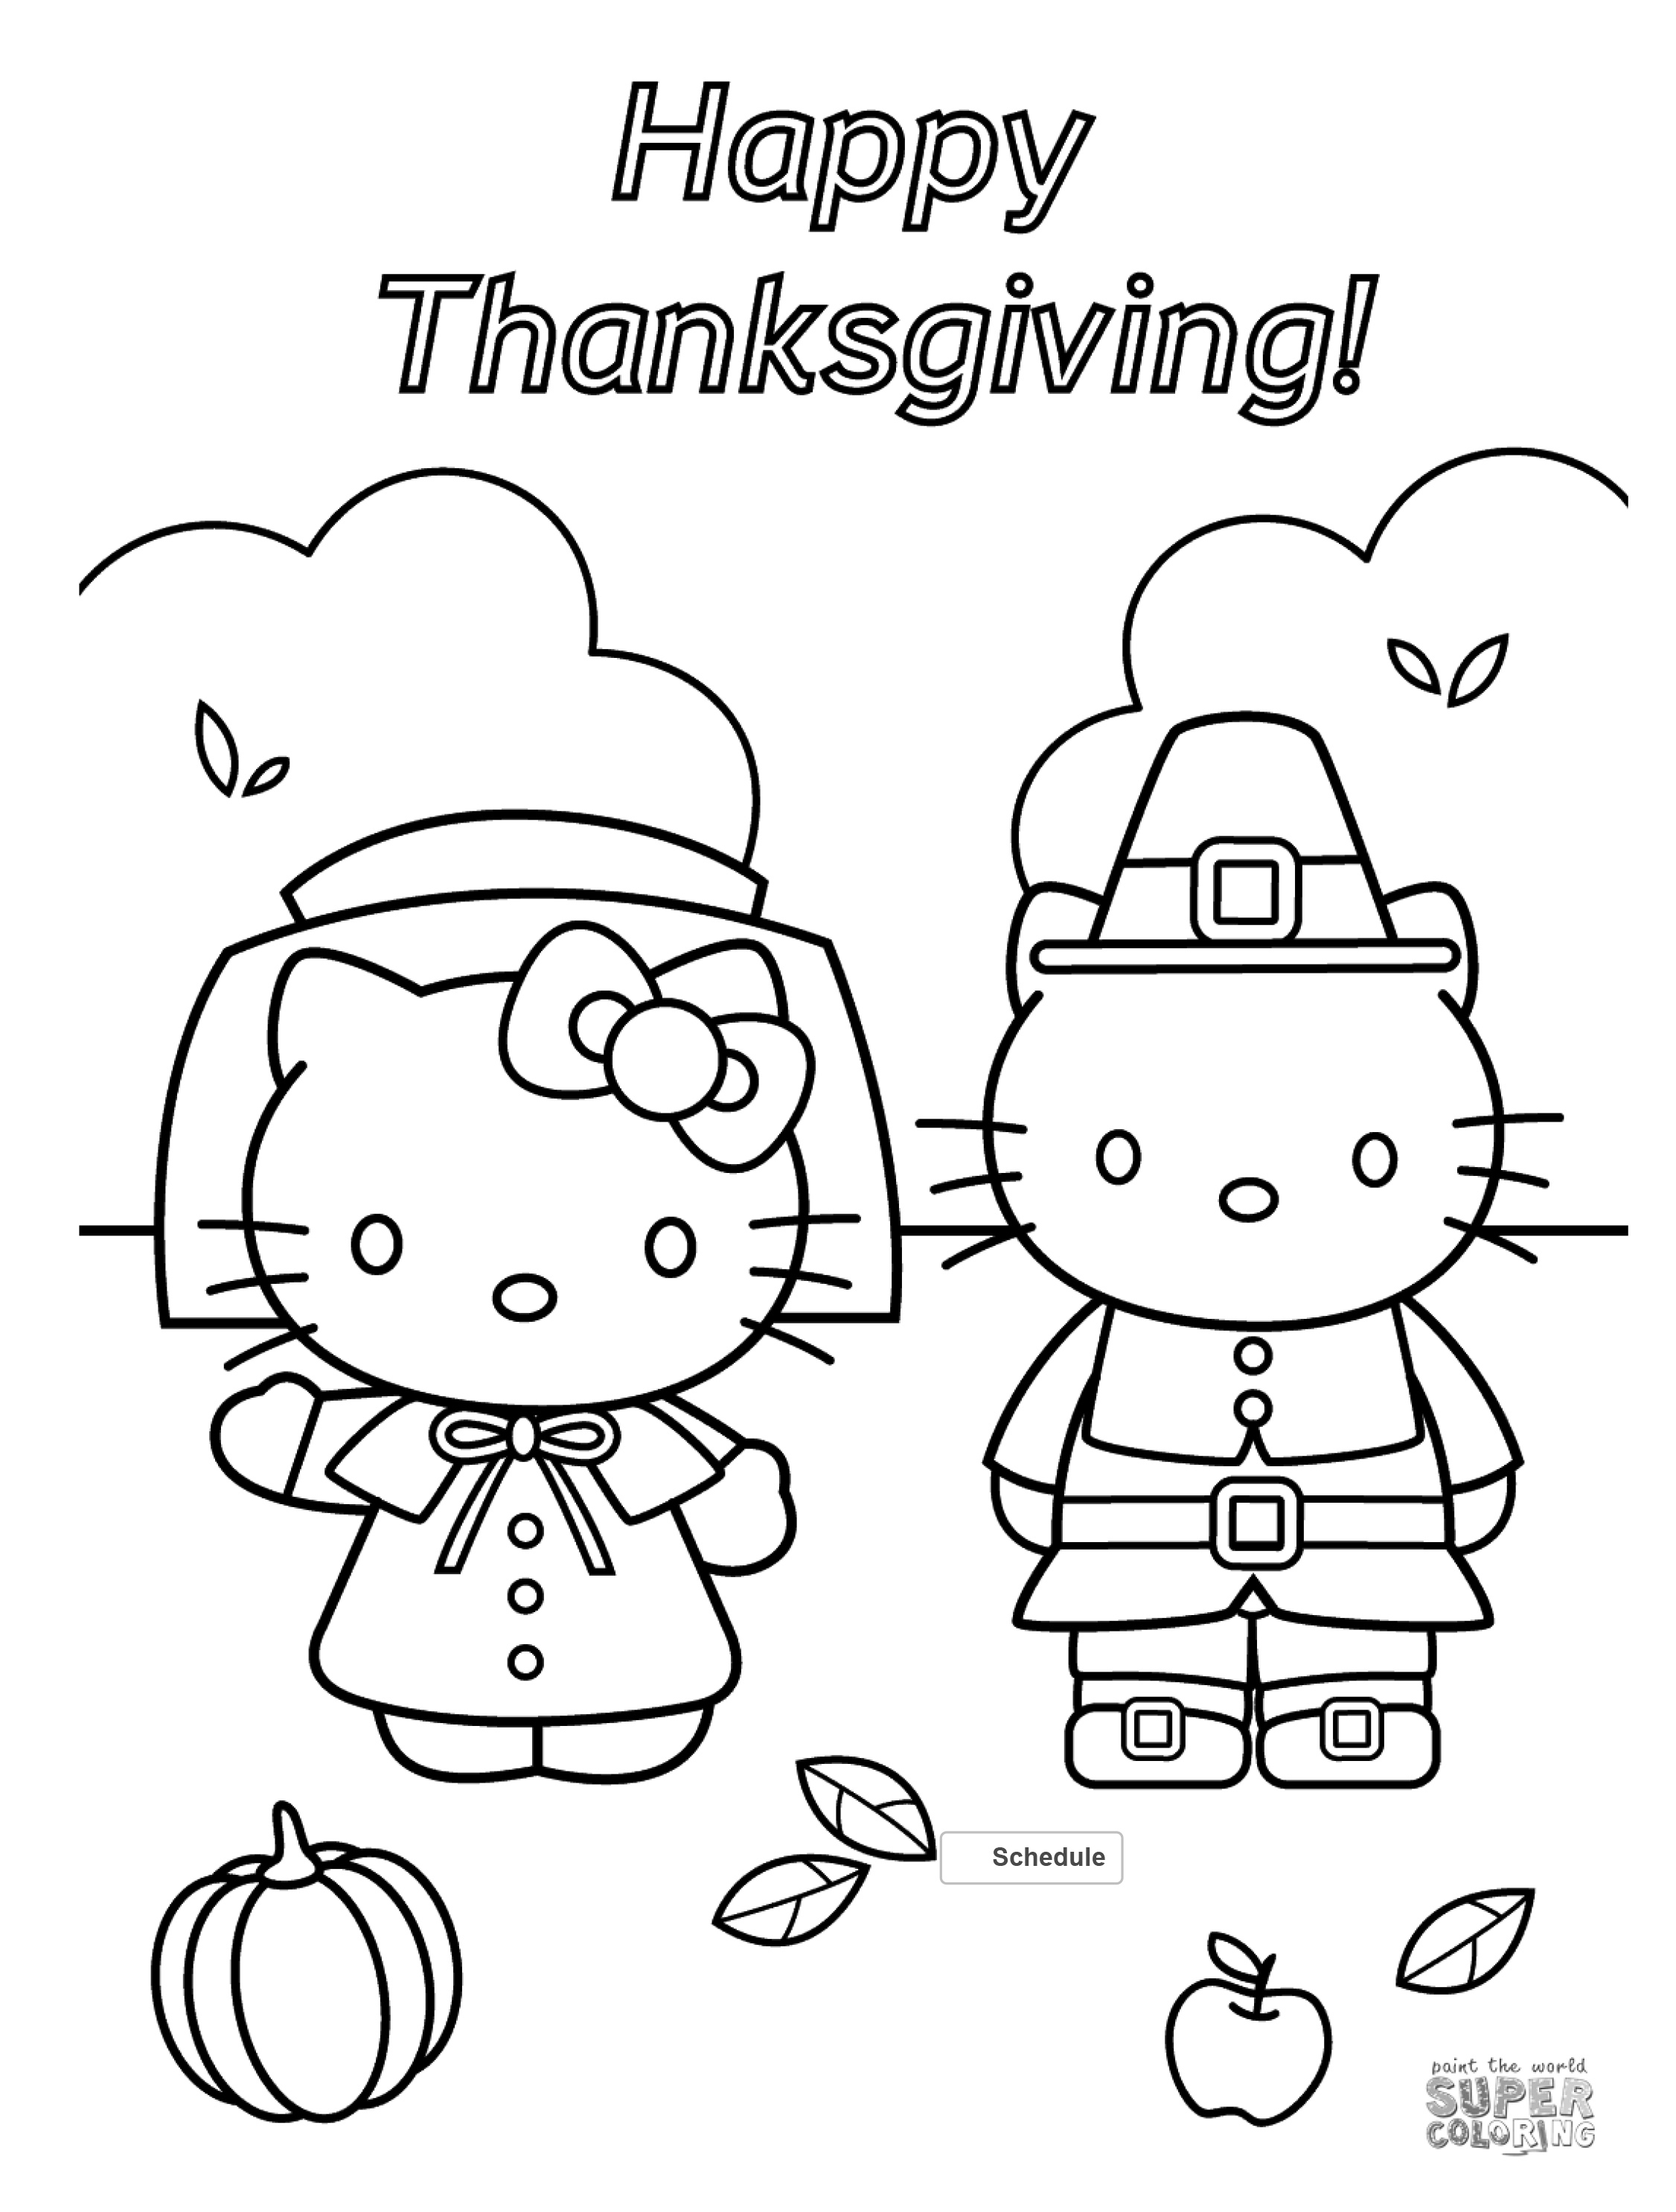 Free Thanksgiving Coloring Pages For Adults &amp;amp; Kids - Happiness Is - Free Printable Thanksgiving Coloring Placemats